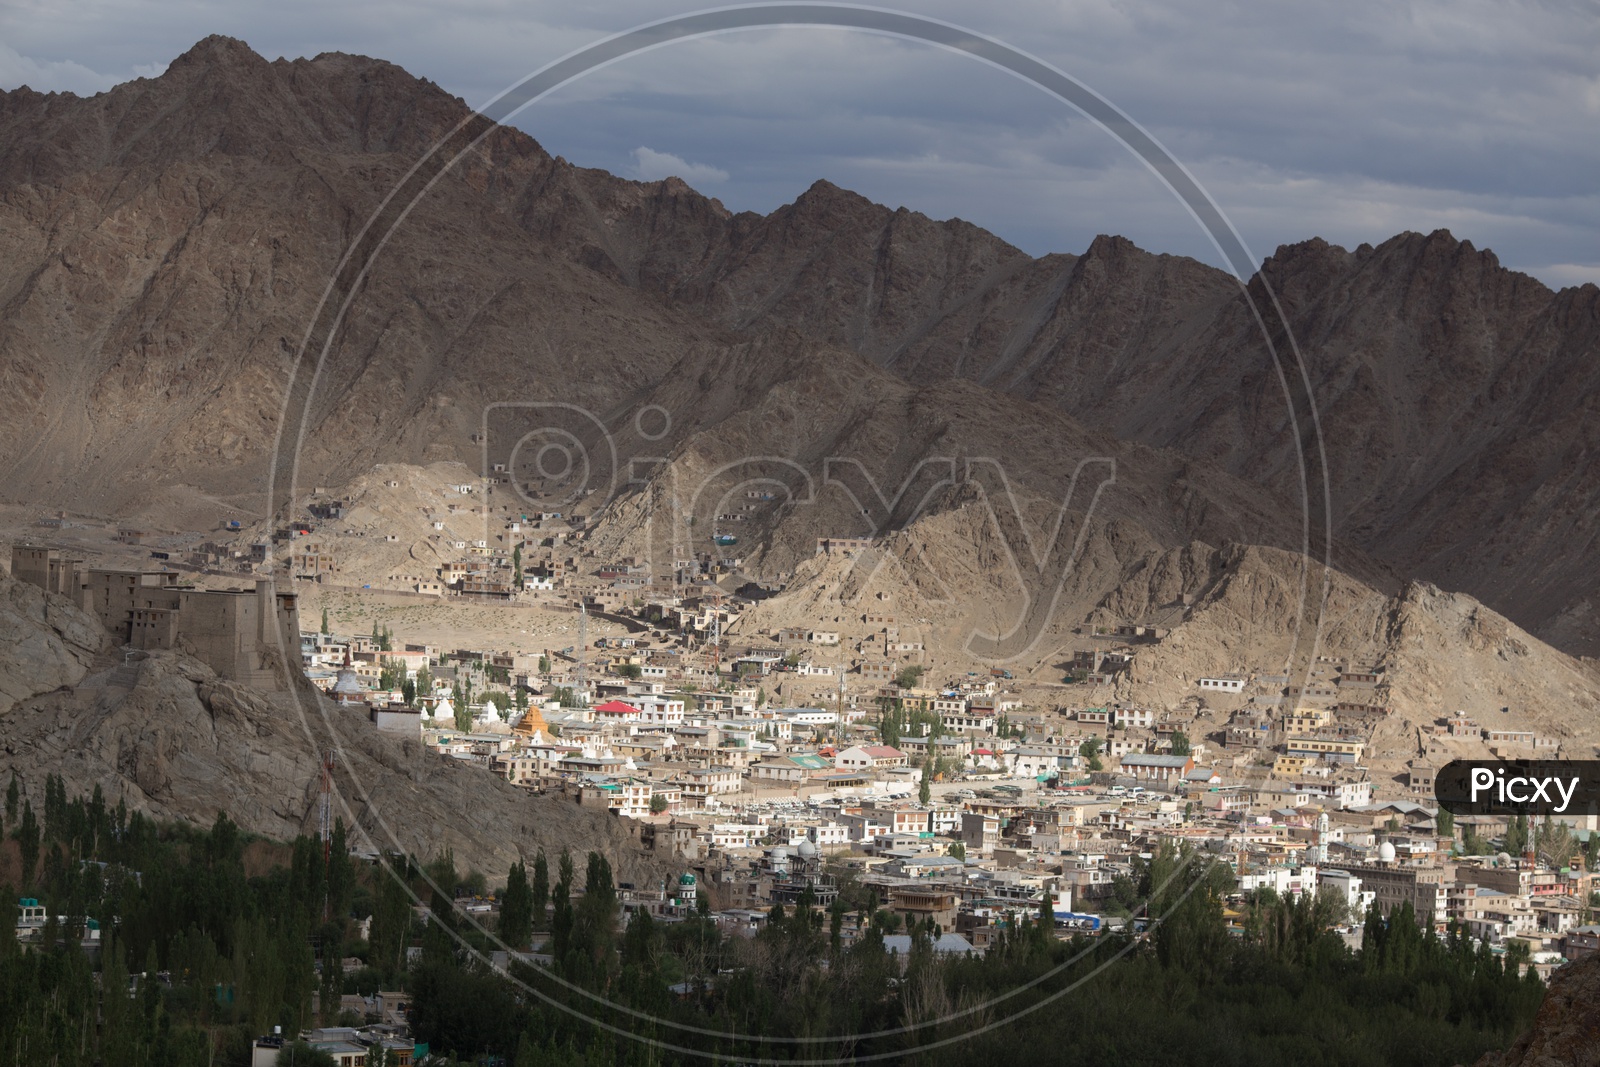 Landscape of Leh Mountains with houses in the foreground